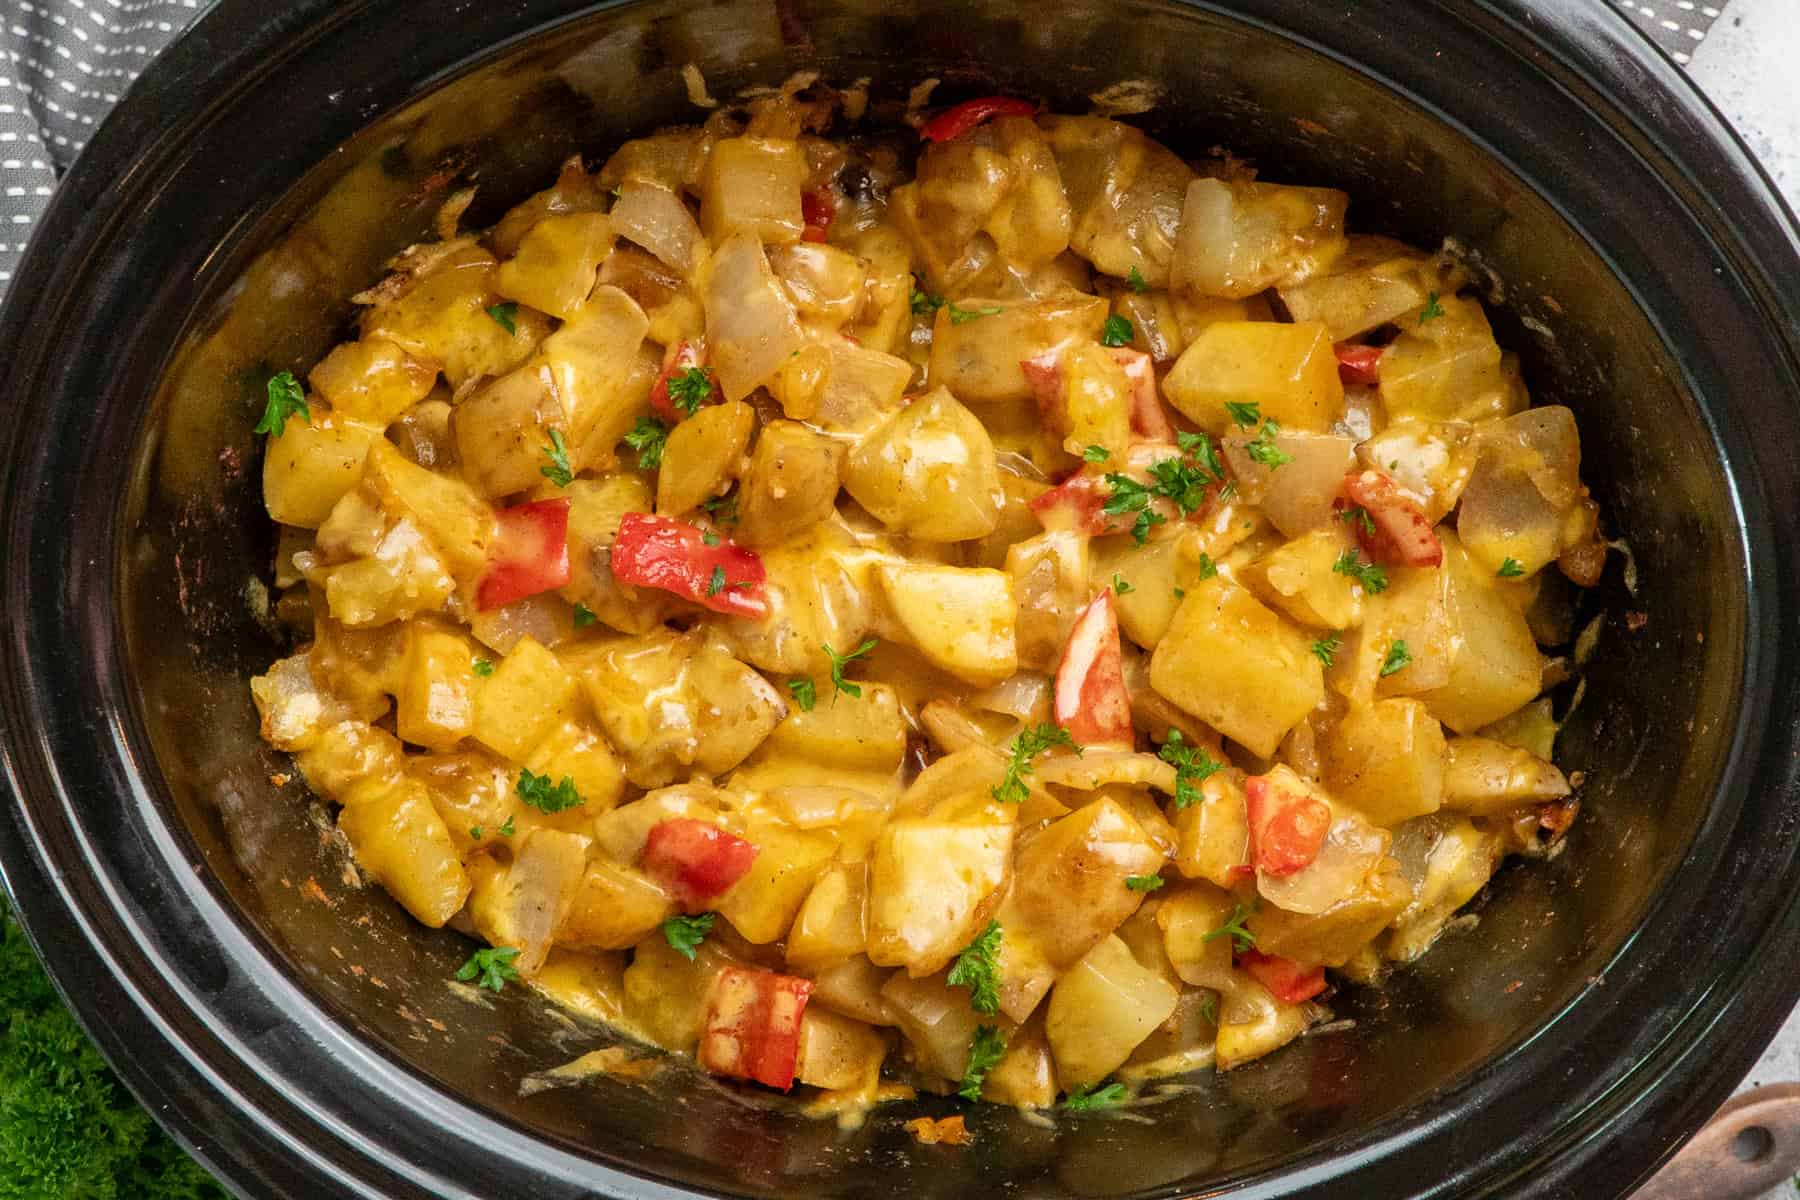 Breakfast potatoes in a crock pot ready to be served.